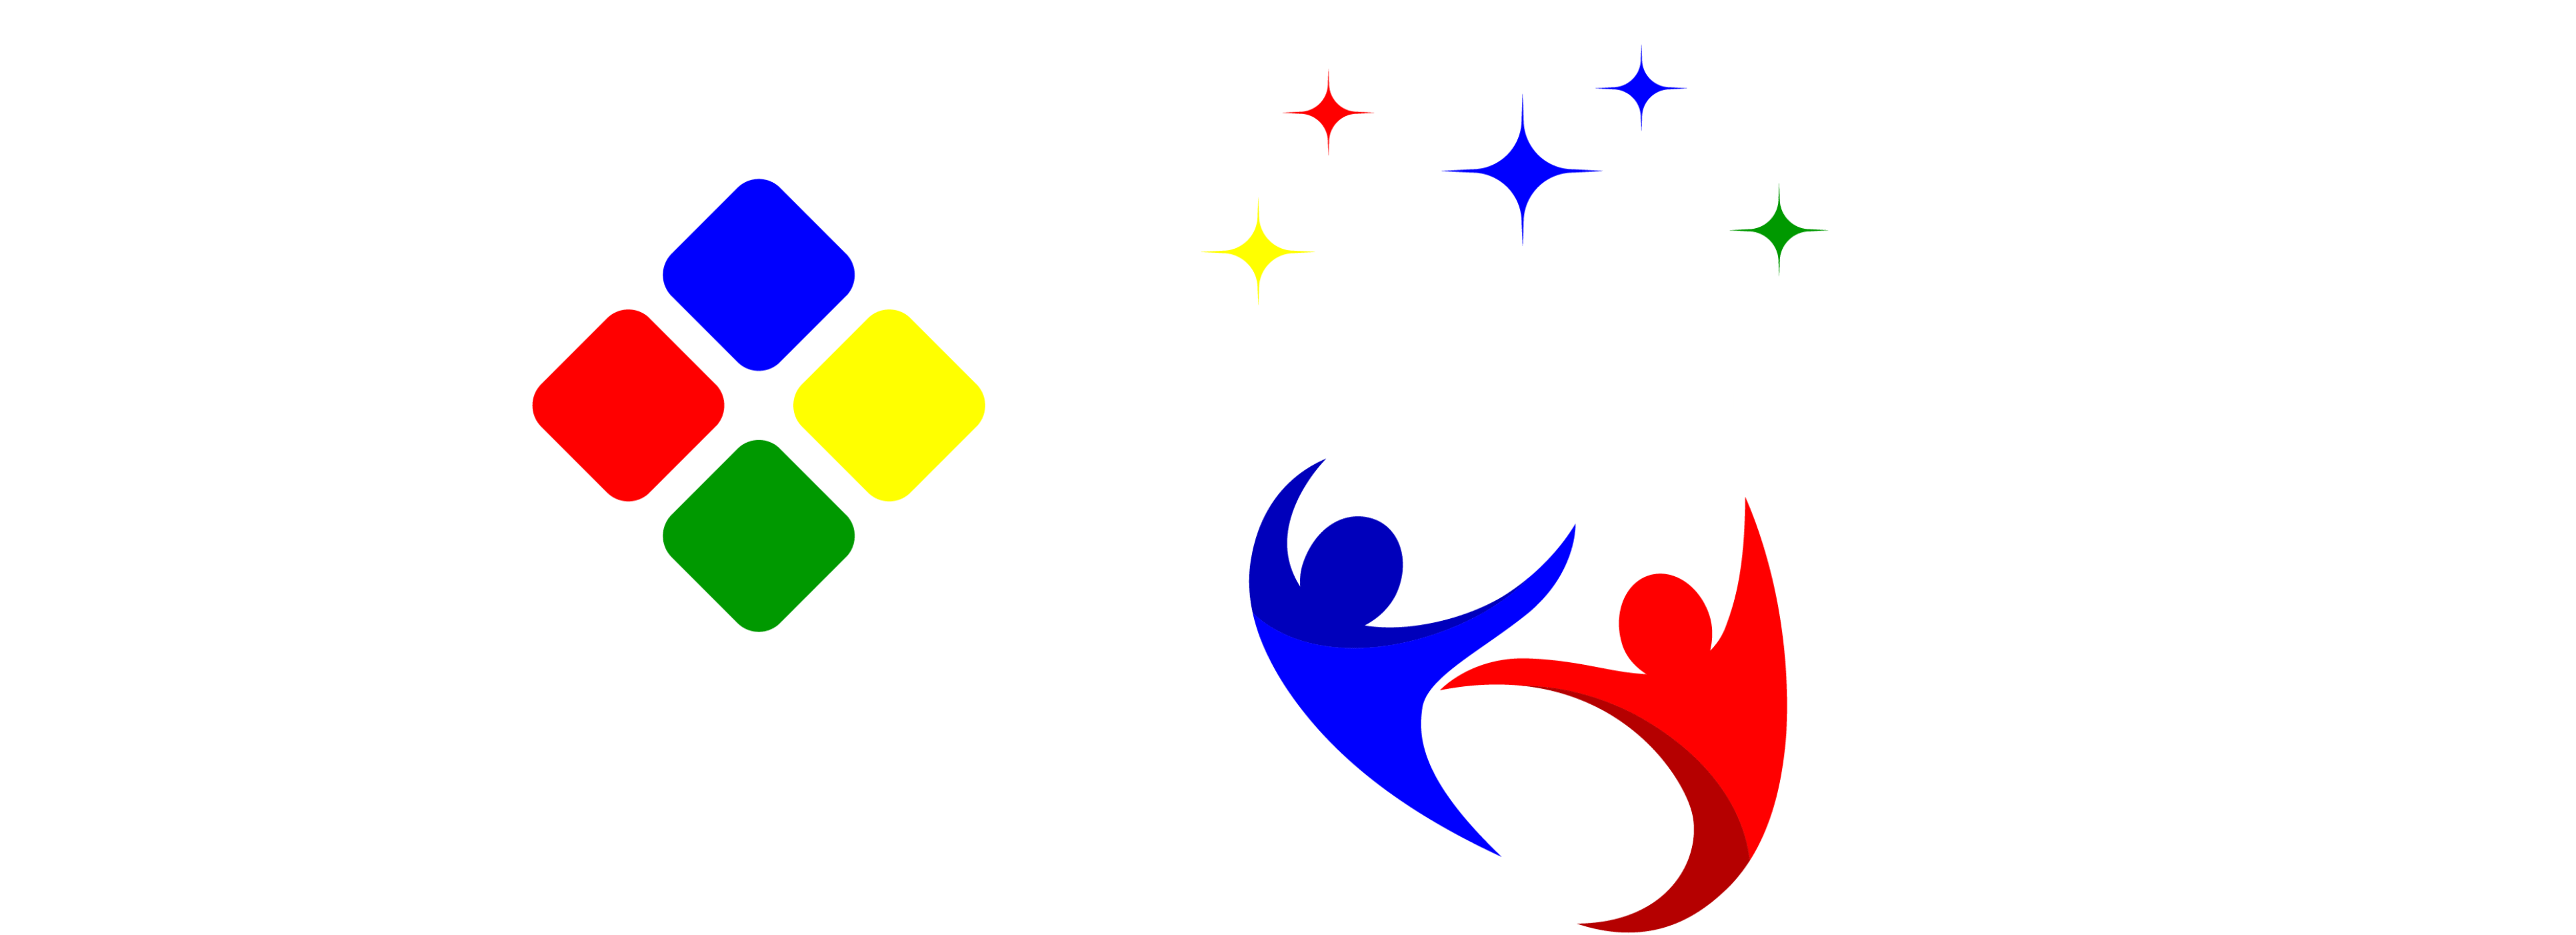 Caribana festival logo with colorful elements and "since 1967" text. Toronto Caribana Carnival: Ultimate Guide to Caribana Festival Events